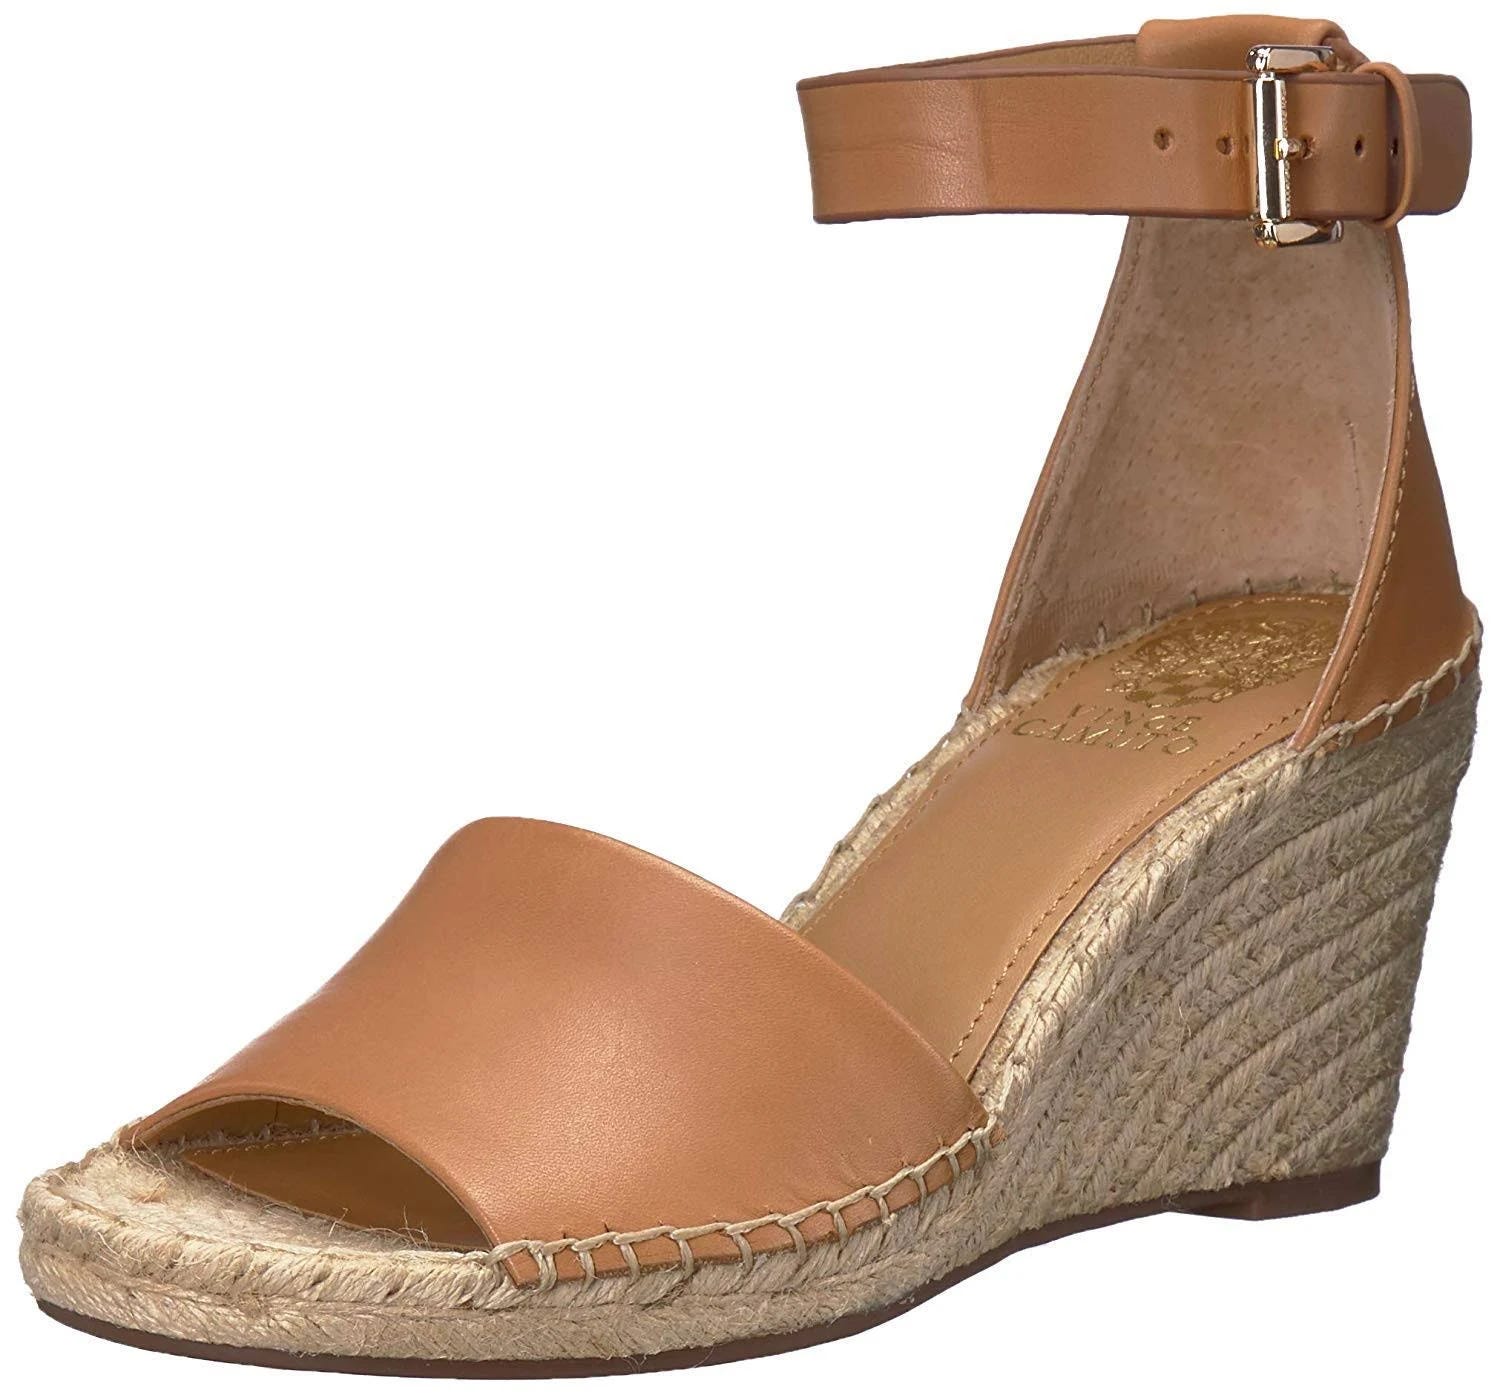 Vince Camuto Leera Espadrille Wedge Sandals in Tan - Luxurious 100% Leather Shoes | Image